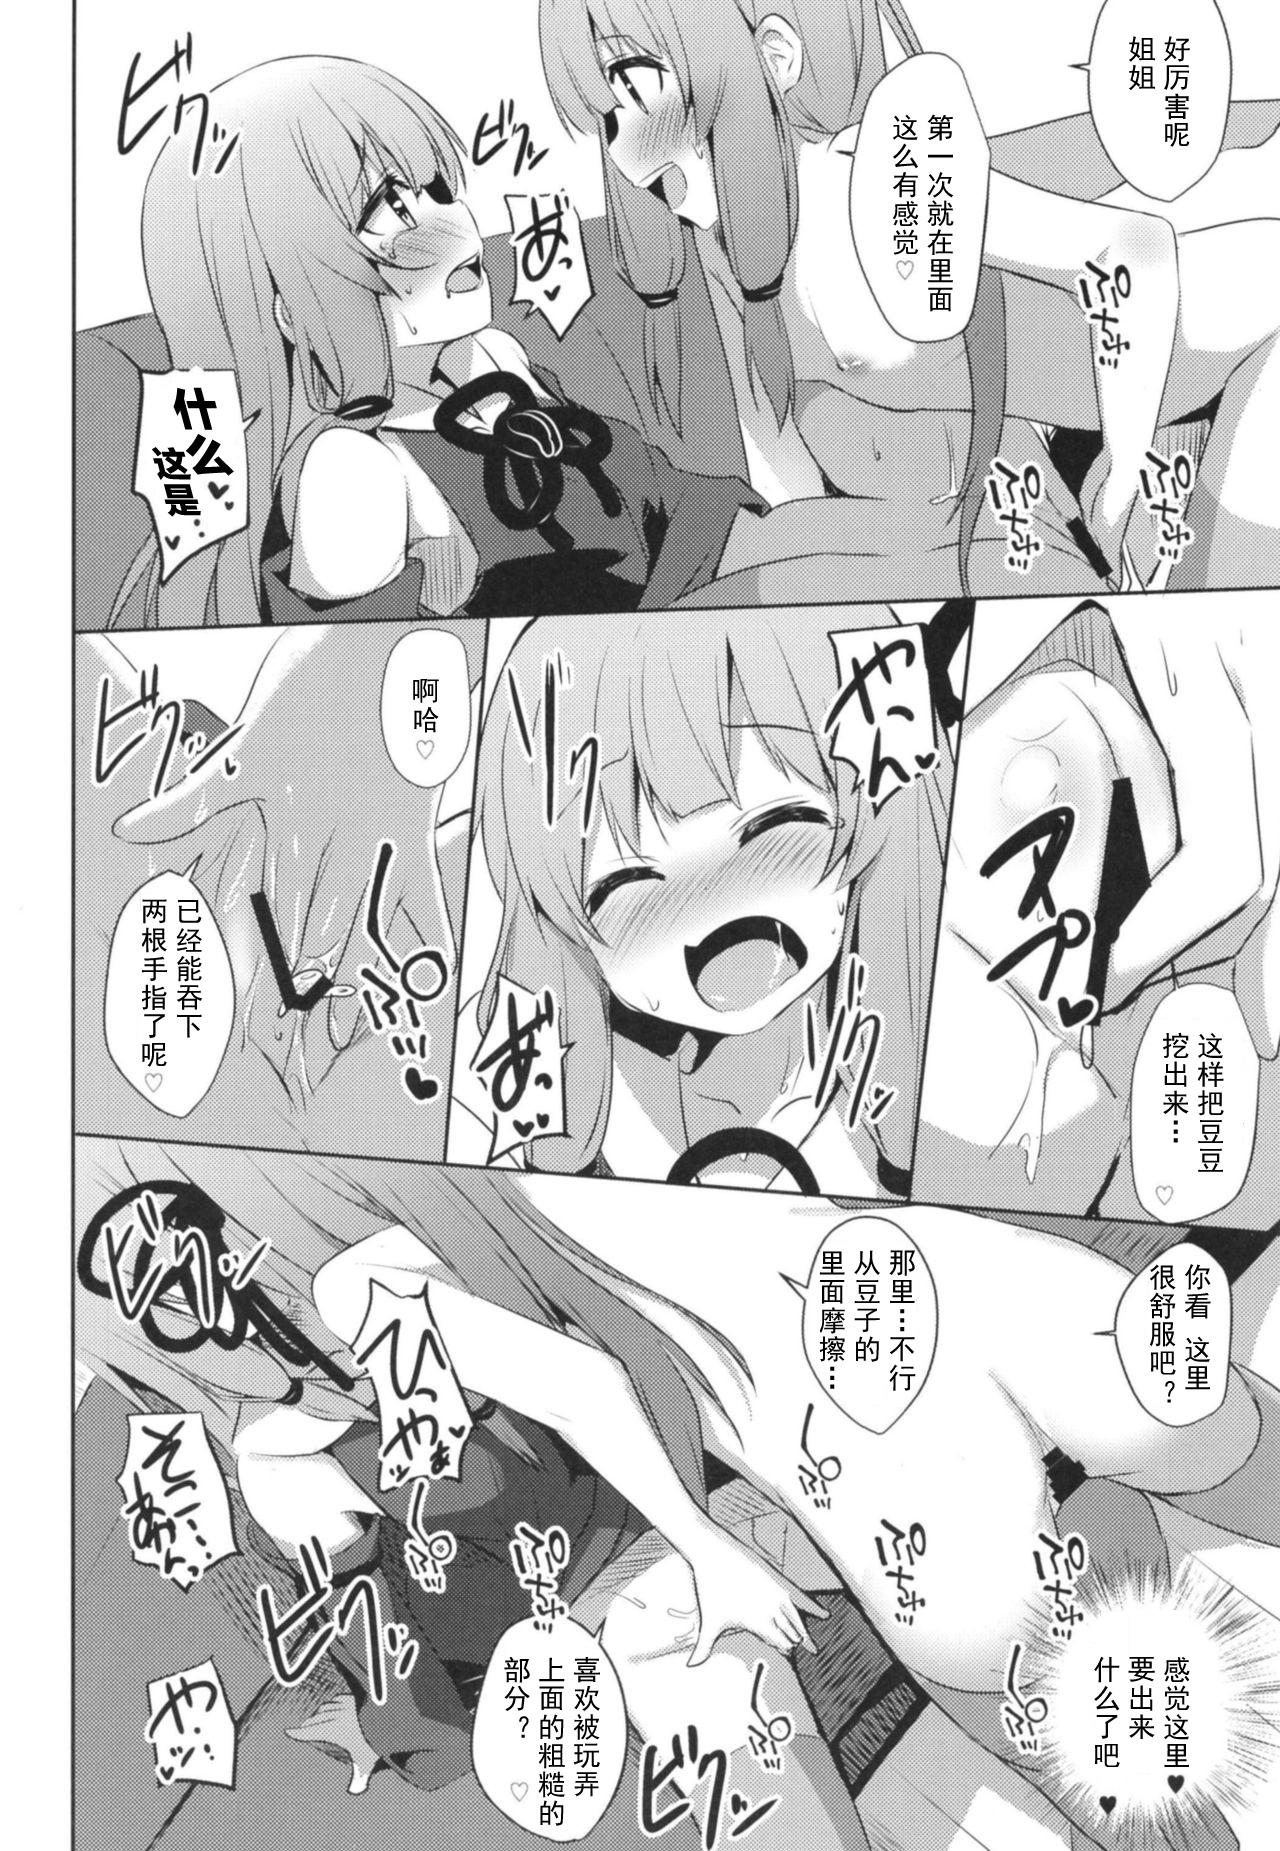 Blackcocks [Milk Pudding (Jamcy)] Akane-chan Challenge! 4-kaime (VOICEROID) [Chinese] [古早个人汉化] [Digital] - Voiceroid Pain - Page 8